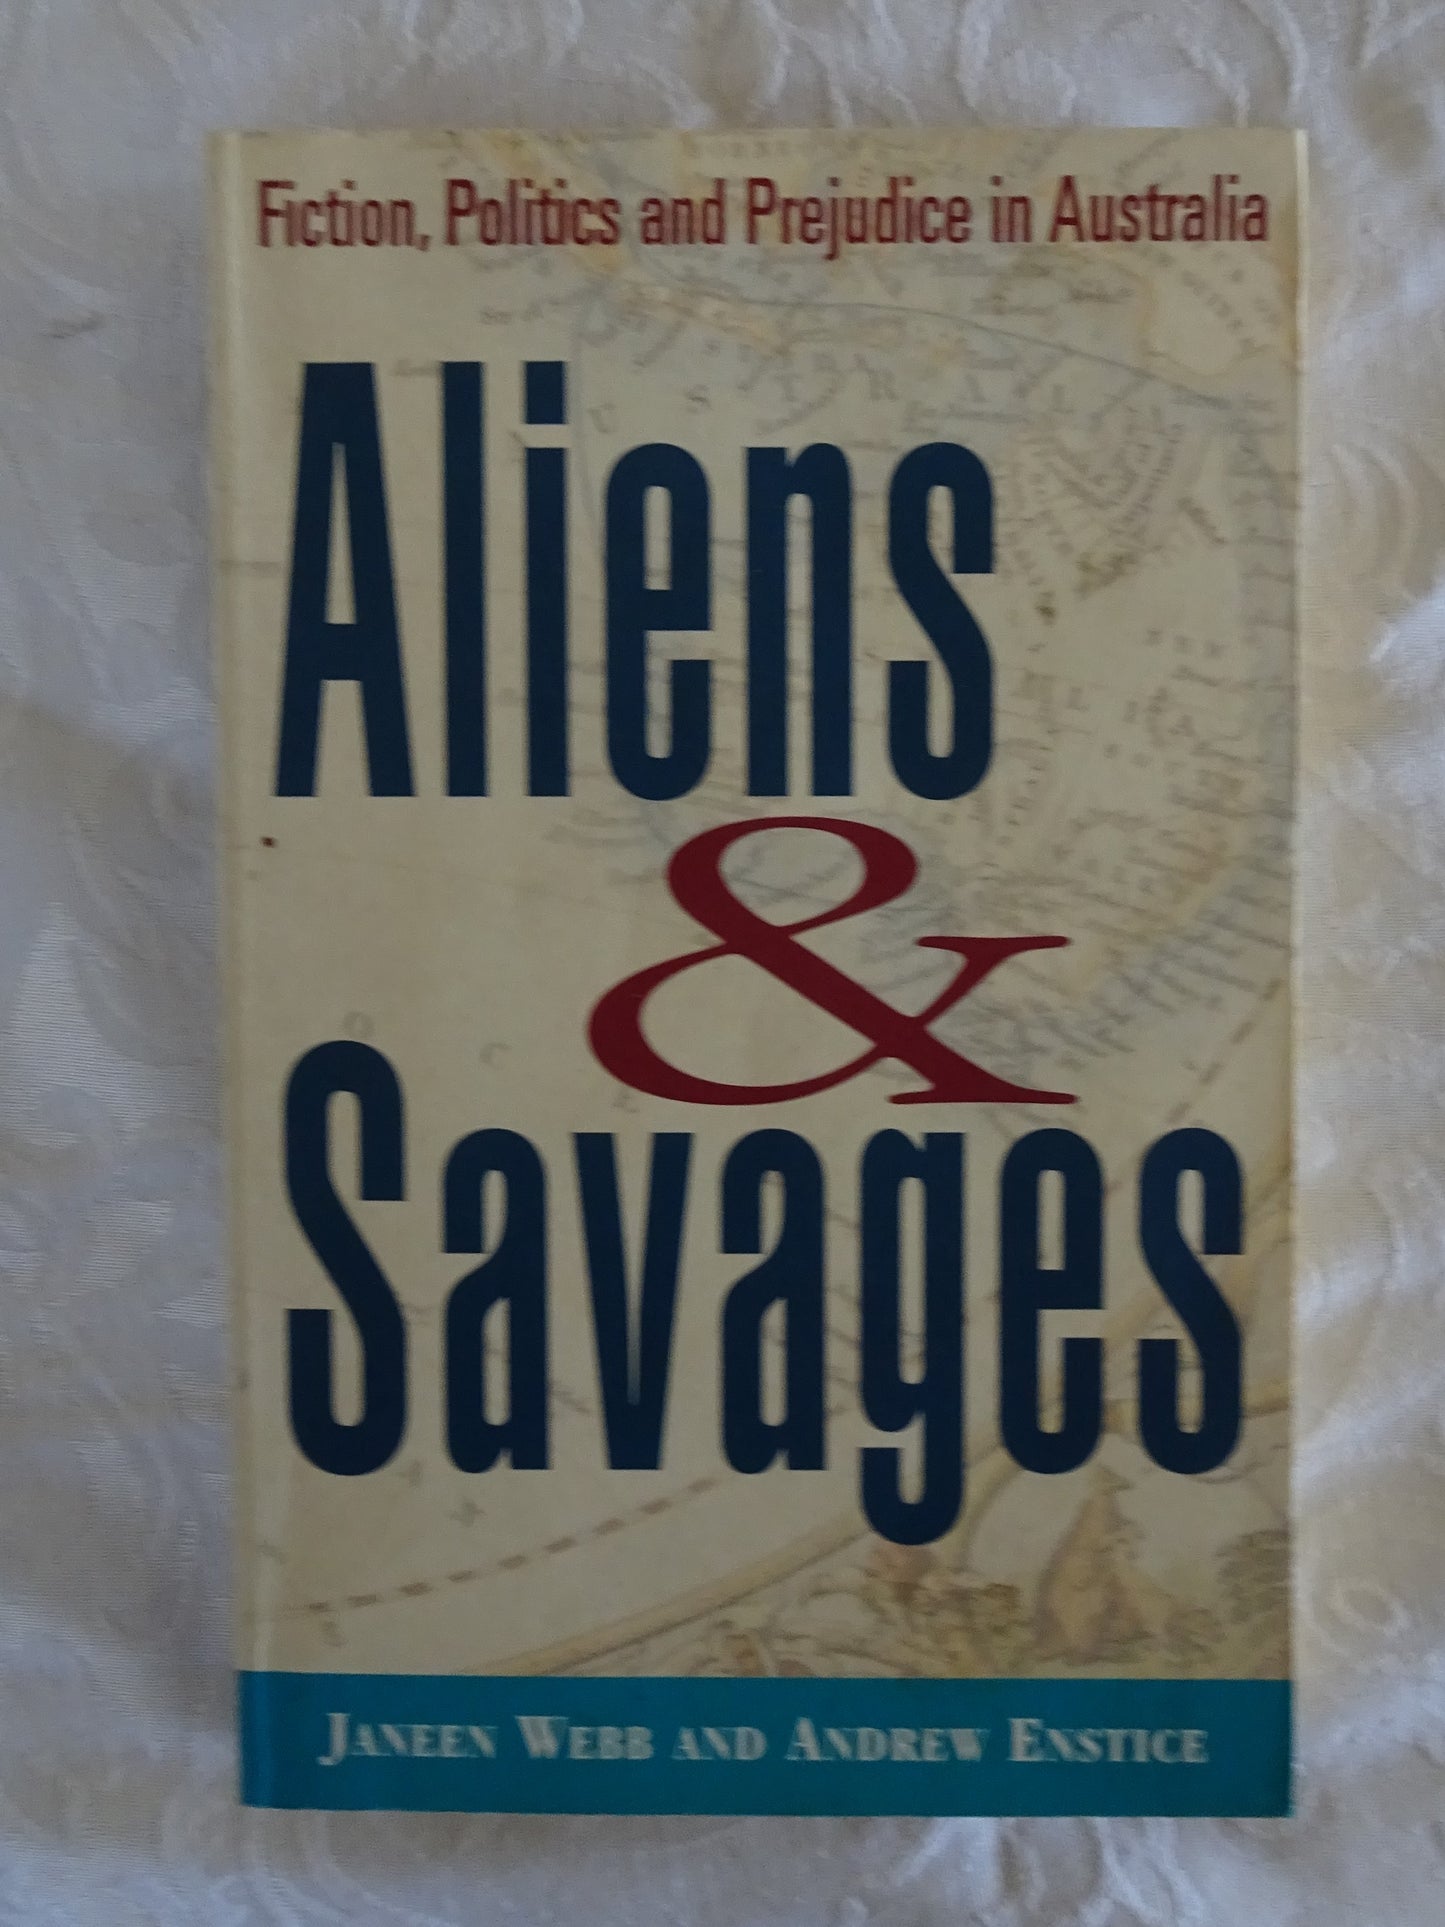 Aliens & Savages by Janeen Webb and Andrew Enstice